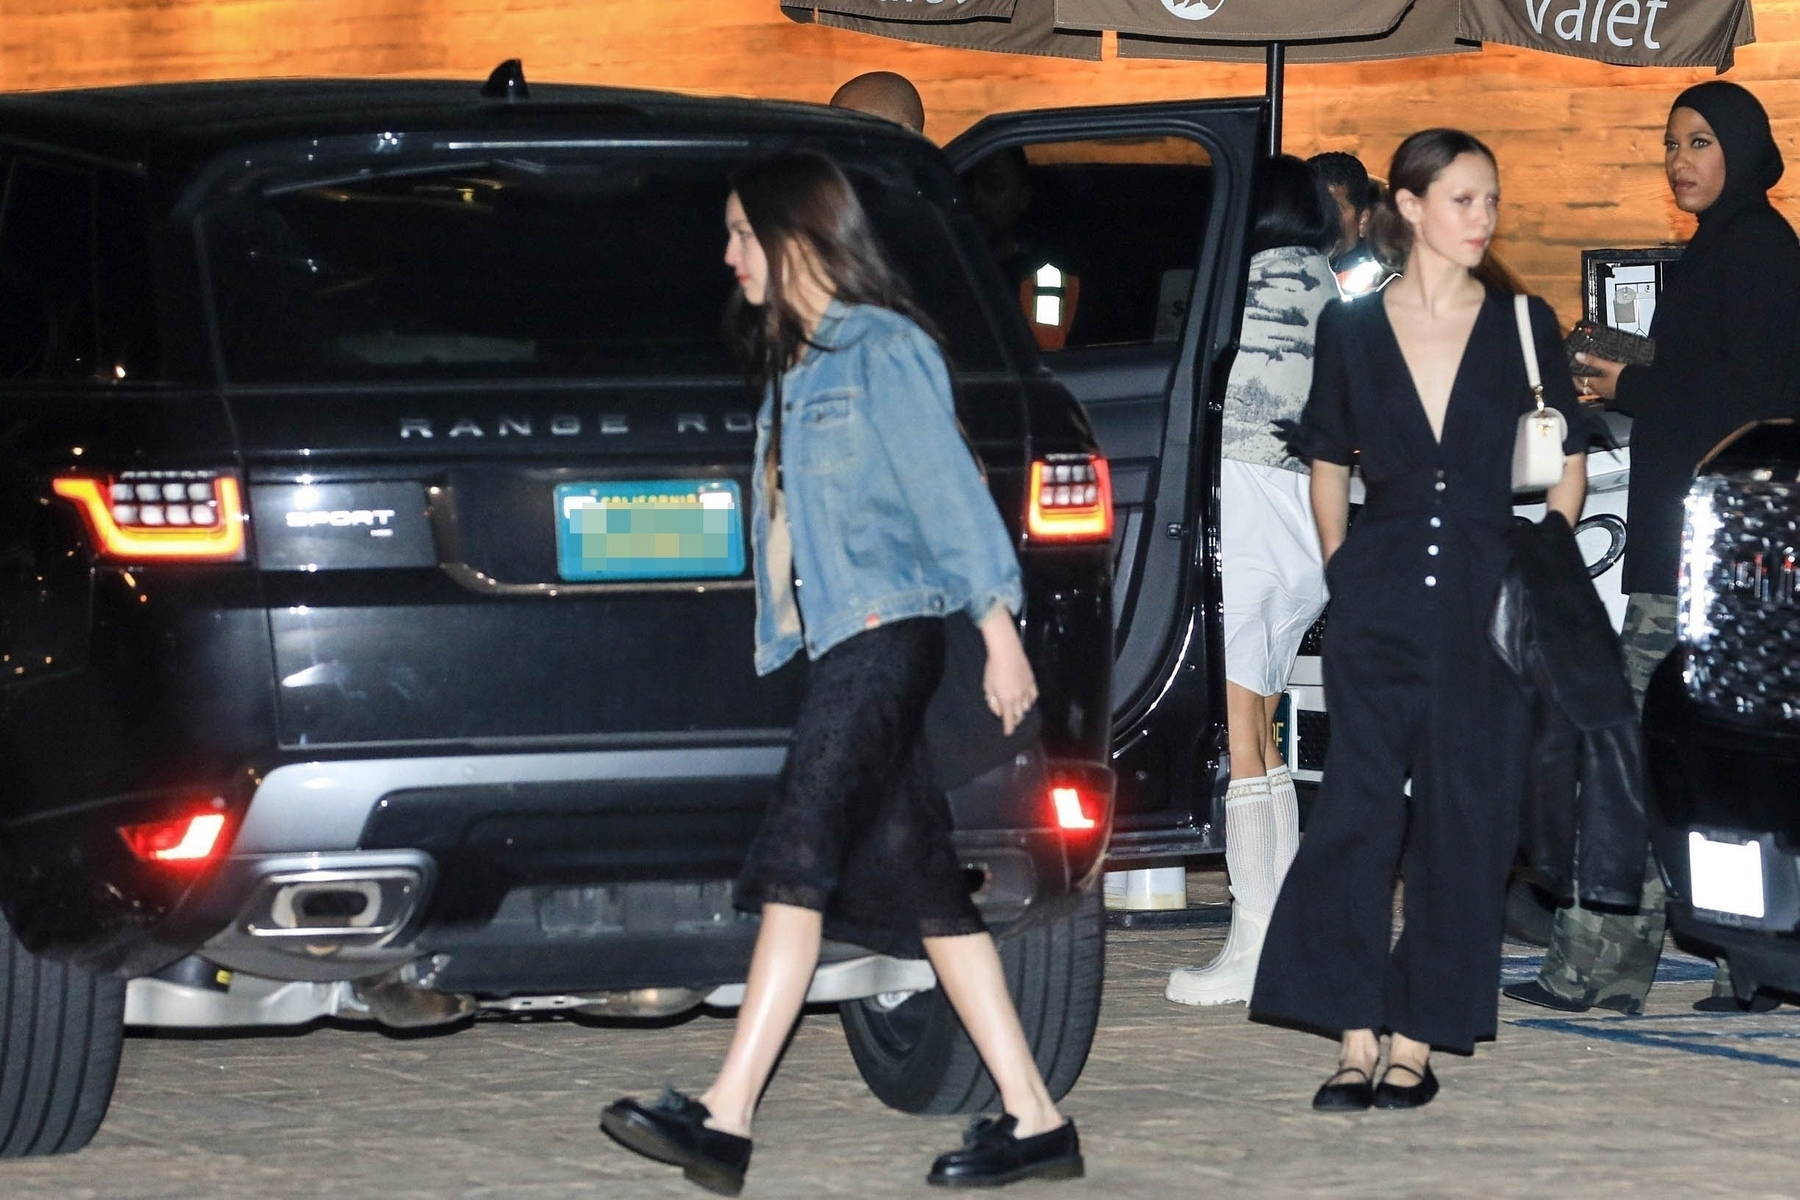 Olivia Rodrigo and Iris Apatow seen leaving after dinner with friends at  Nobu in Malibu, California